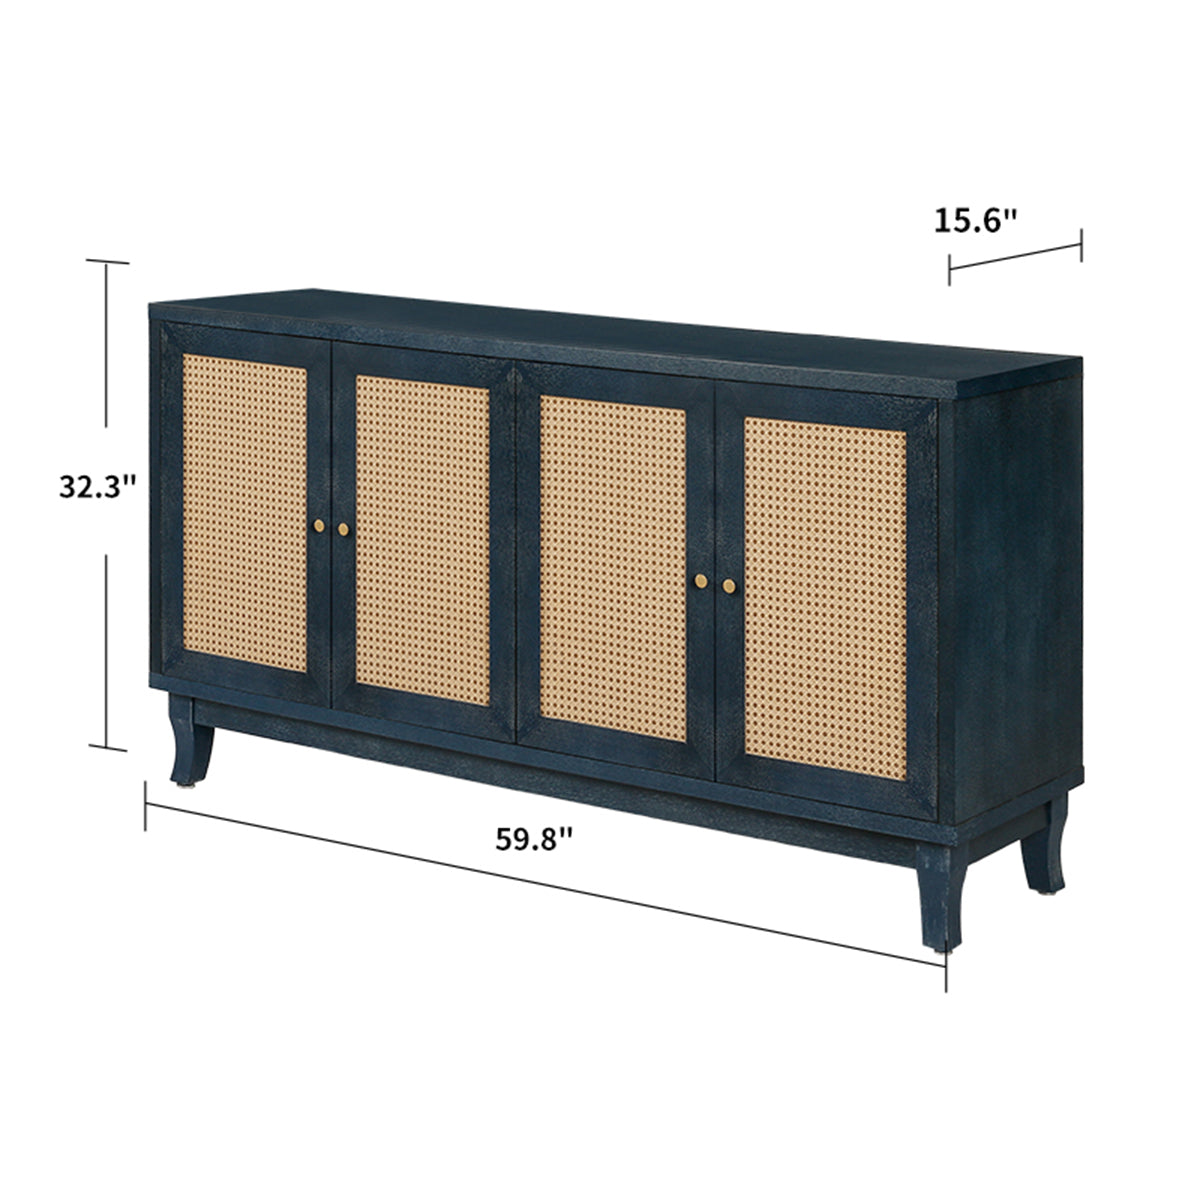 Zrun Accent Cabinet with Rattan Door Fronts - Antique Blue